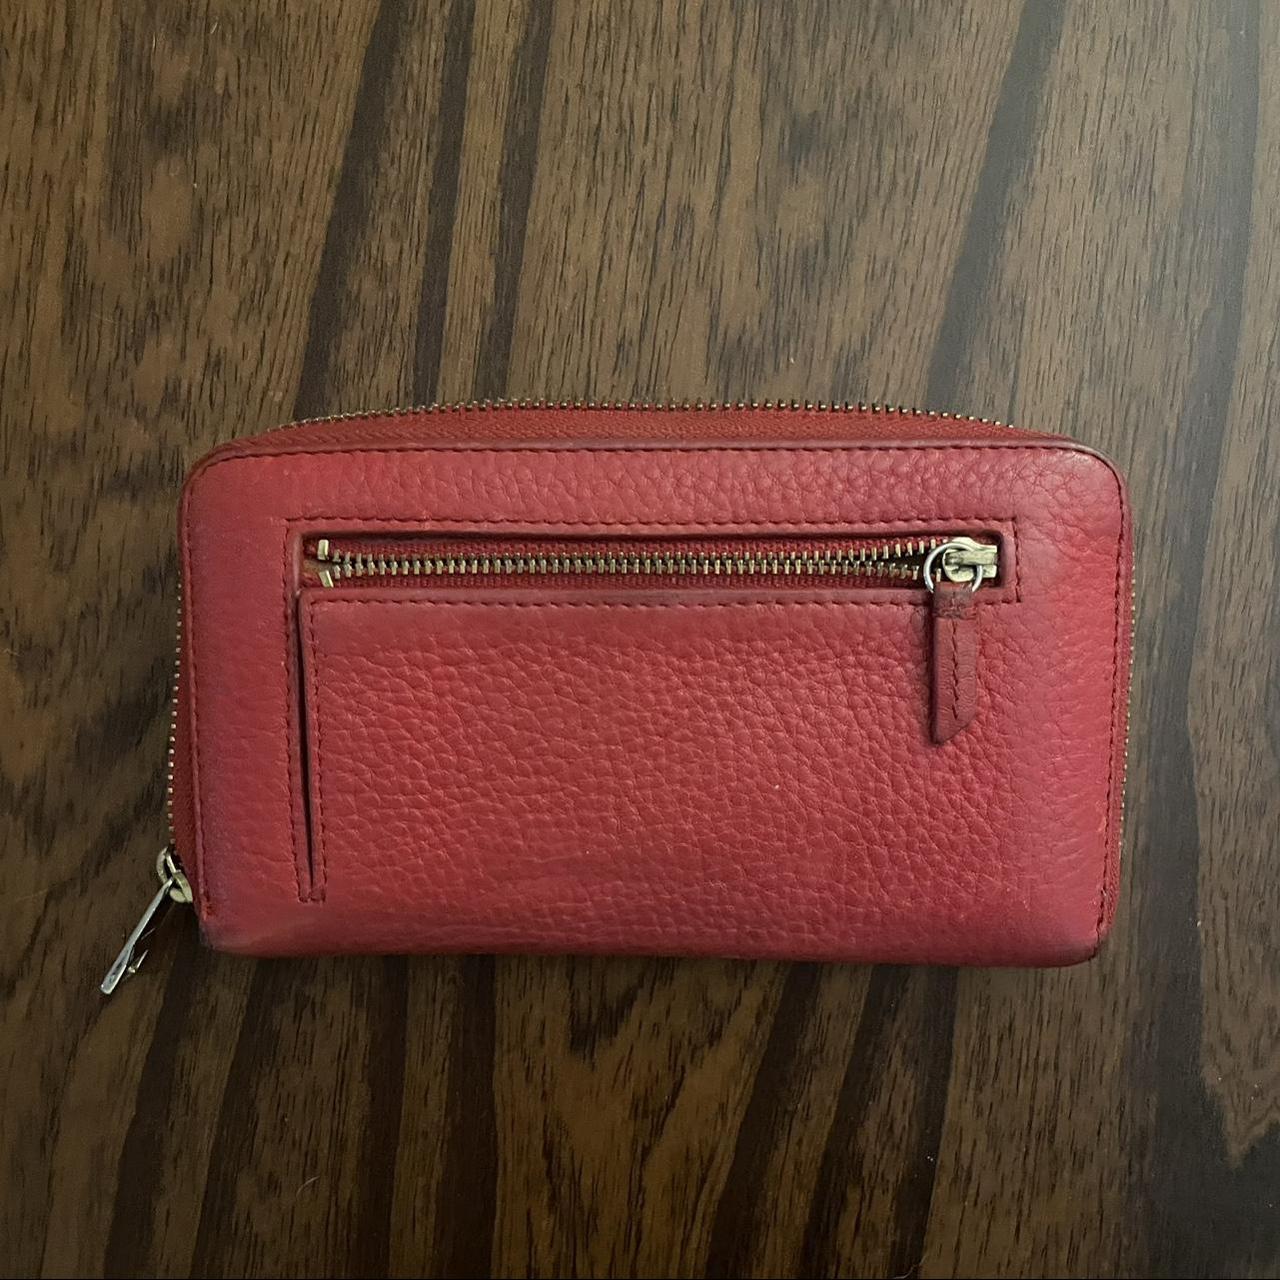 Fossil Red Leather Crossbody Purse - Depop